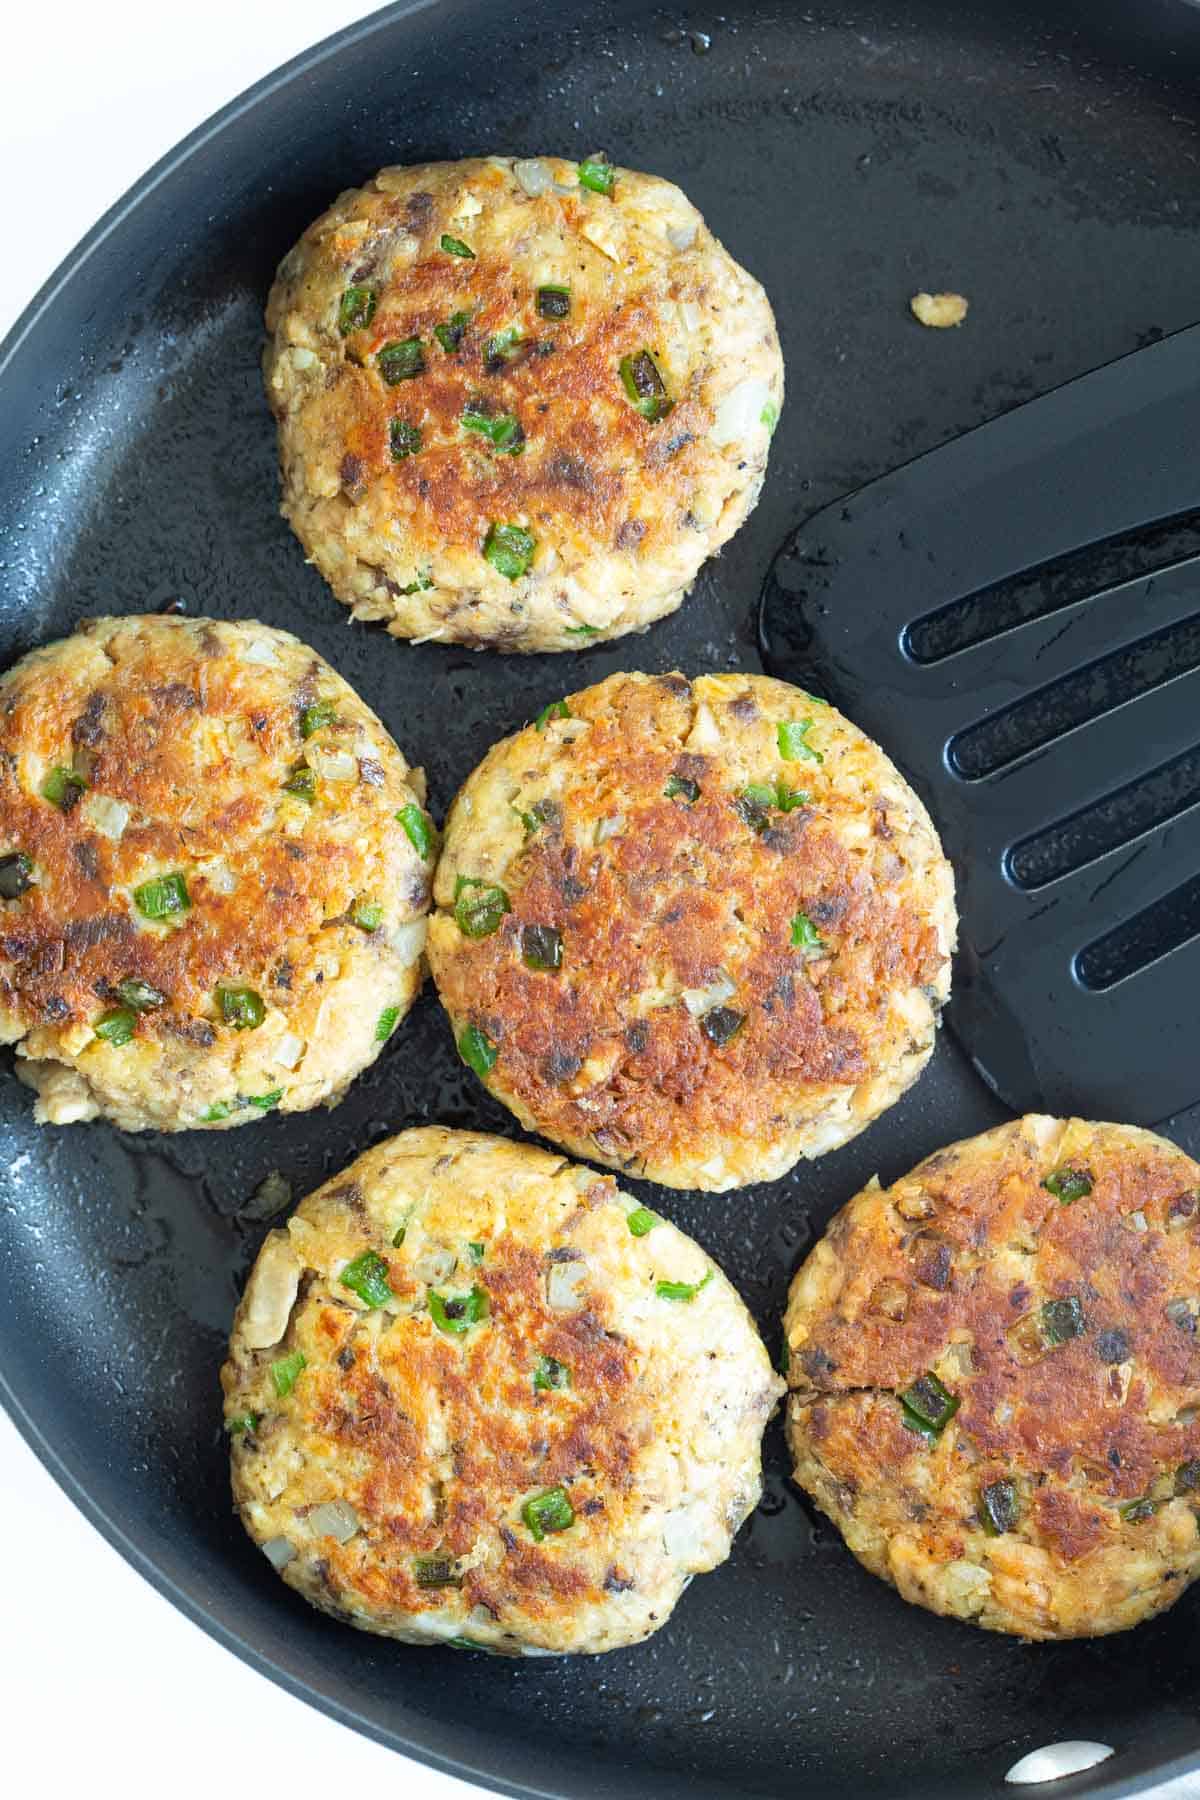 Overhead view of five salmon patties in a nonstick skillet with a spatula.